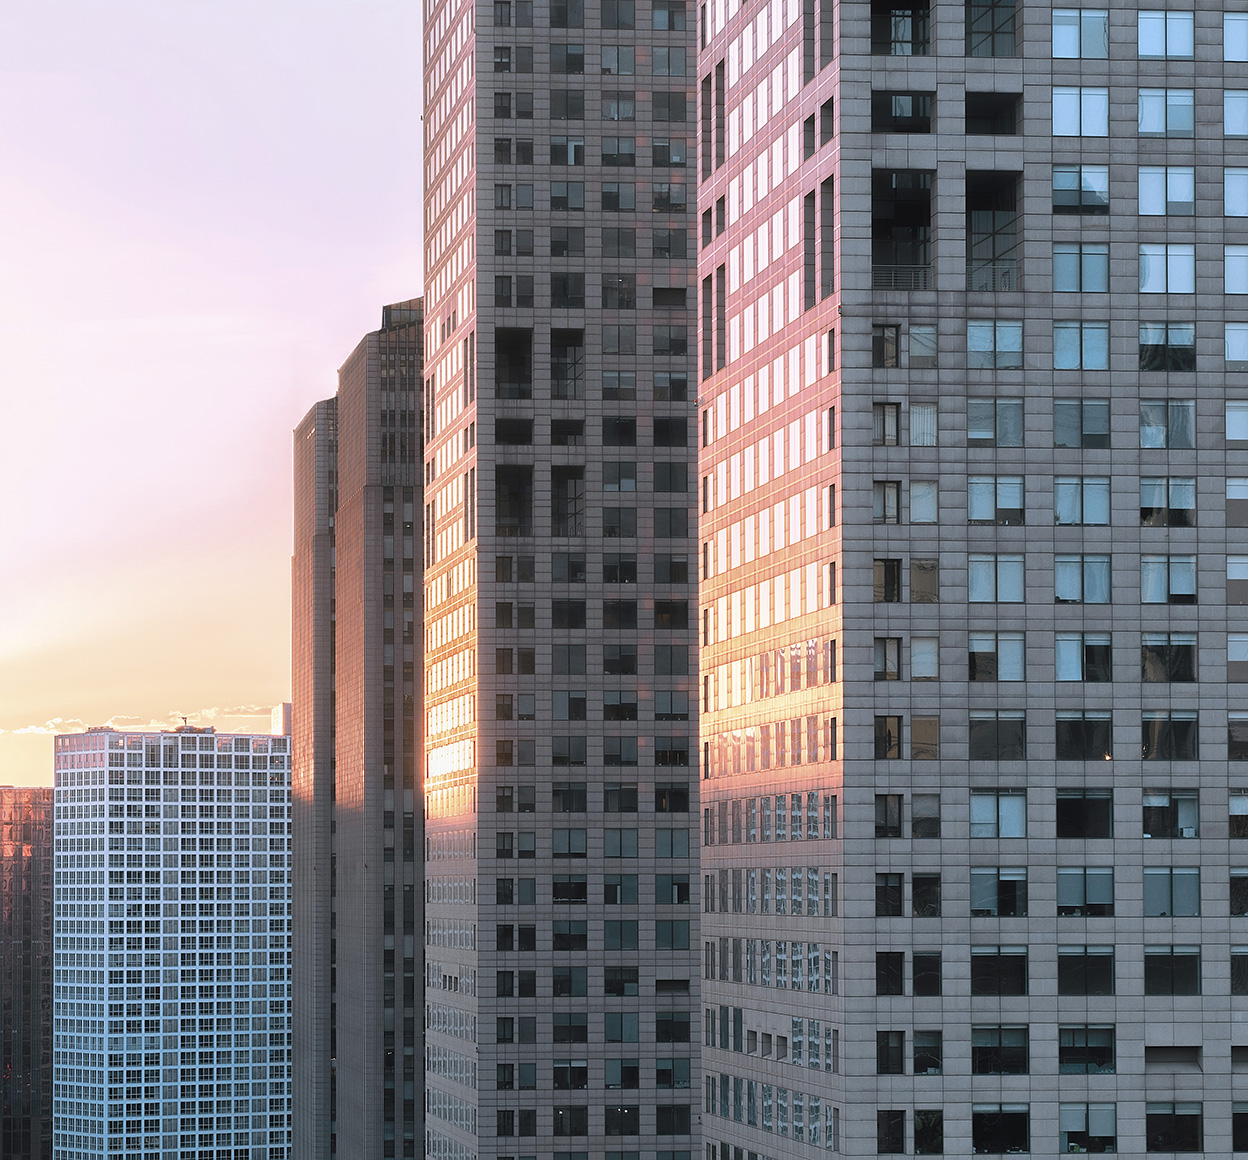 Exterior of buildings at sunset